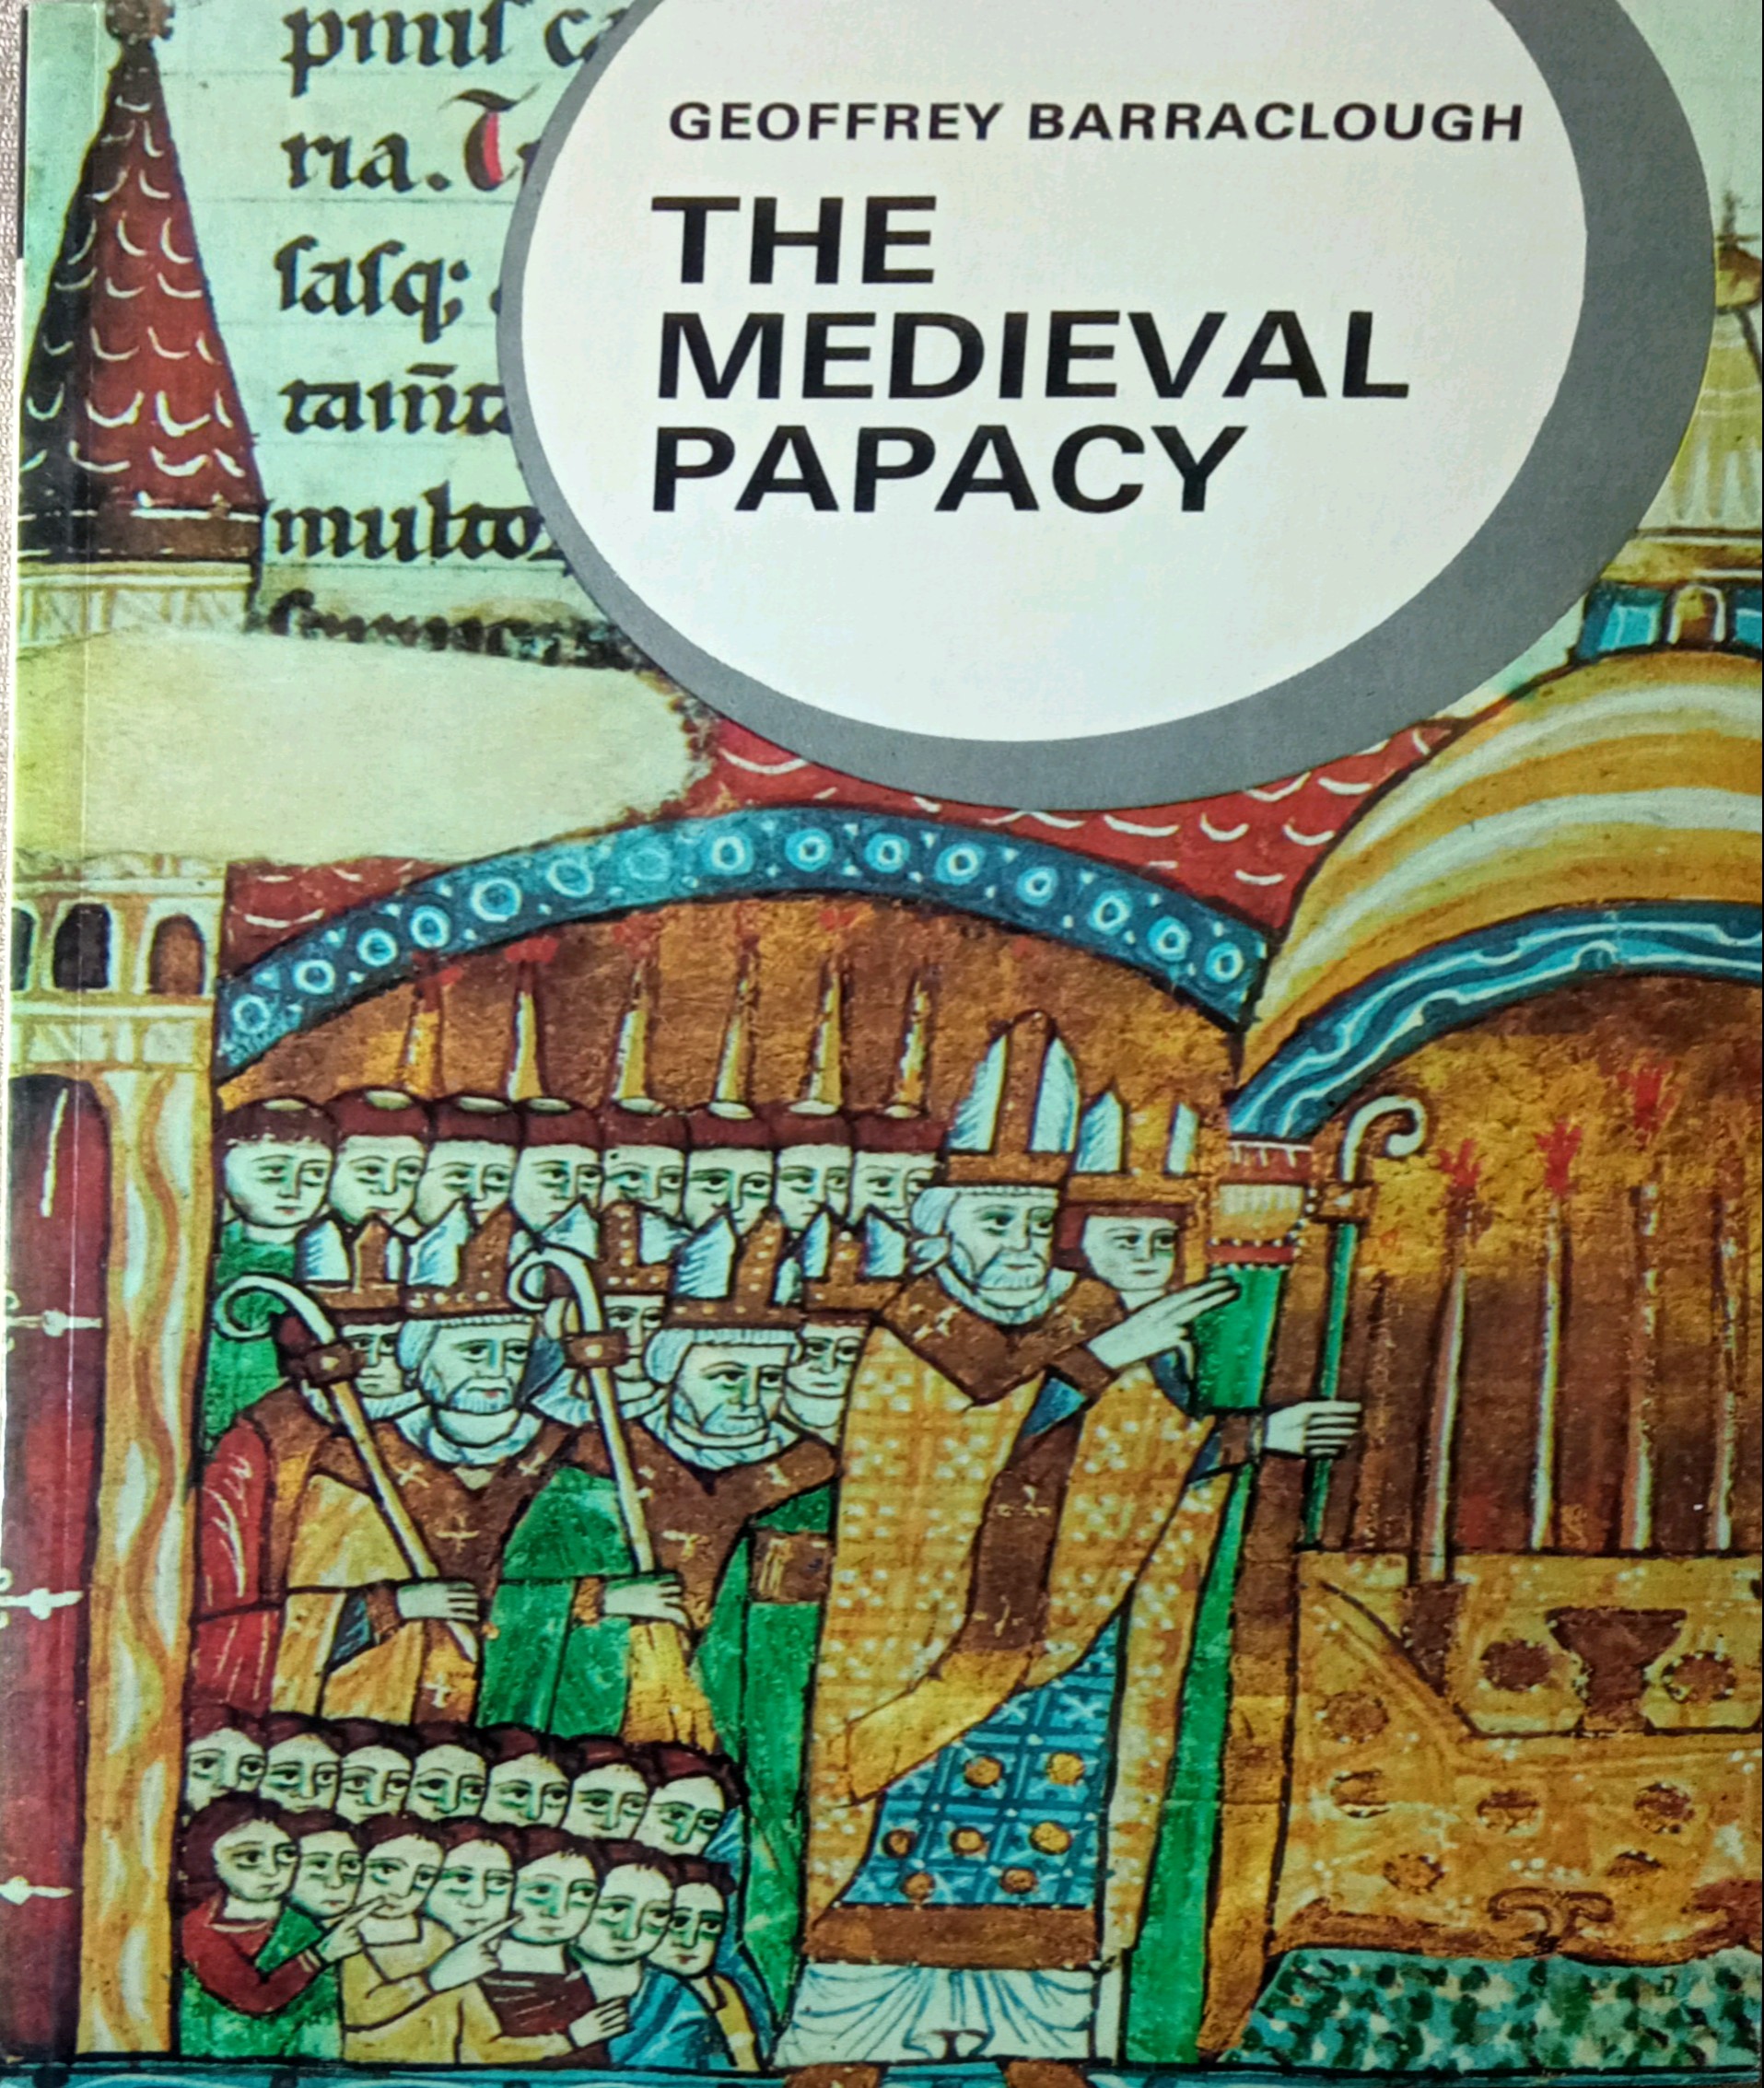 THE MEDIEVAL PAPACY